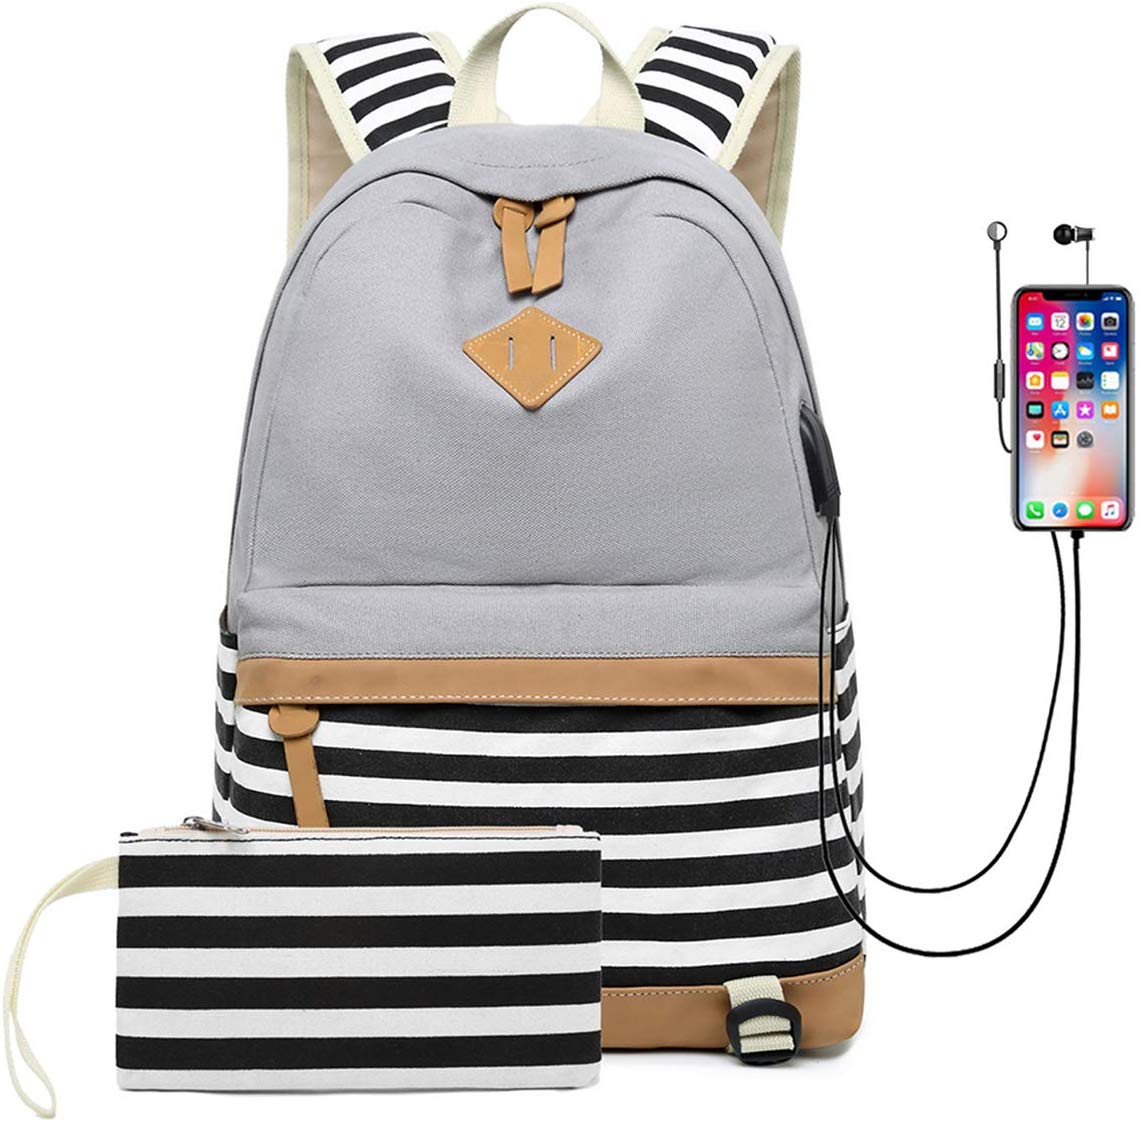 School Backpack with USB Charging Port